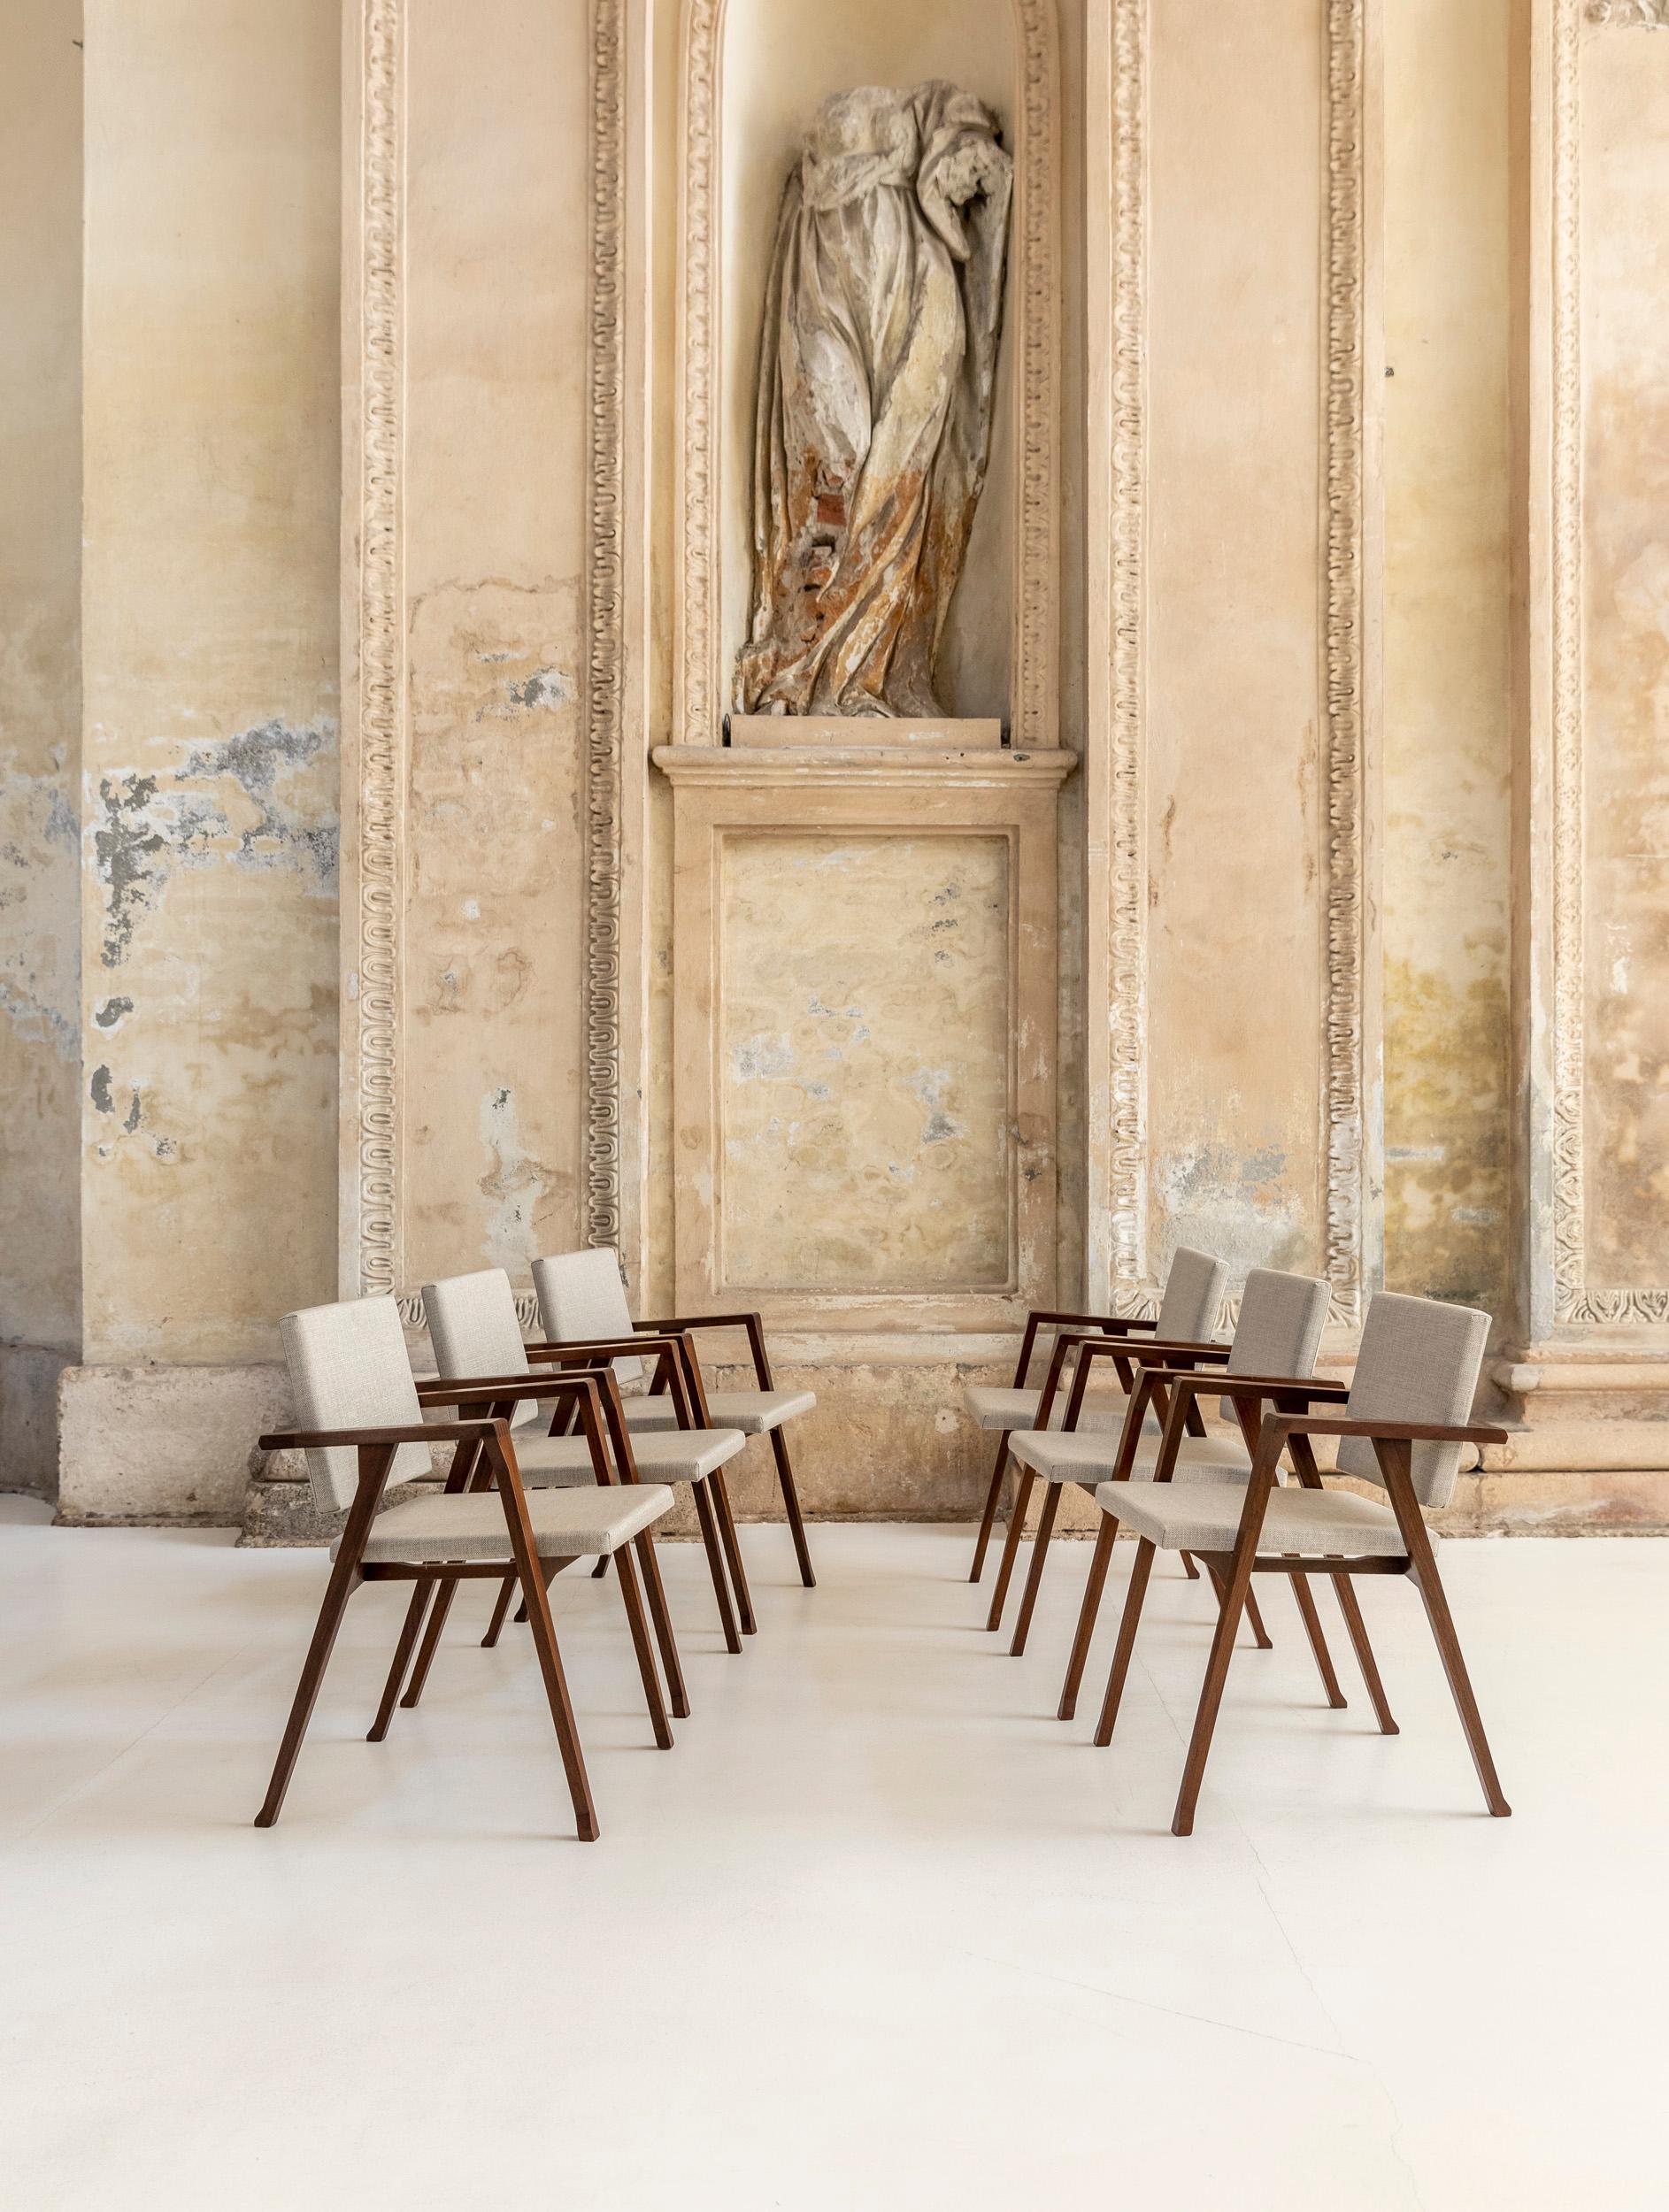 Set of six Luisa chairs with a wooden structure upholstered in beige fabric, designed by Franco Albini and manufactured by Poggi Pavia, c. 1950. 
Luisa chair won the Compasso d'oro ADI in 1955.
Published.